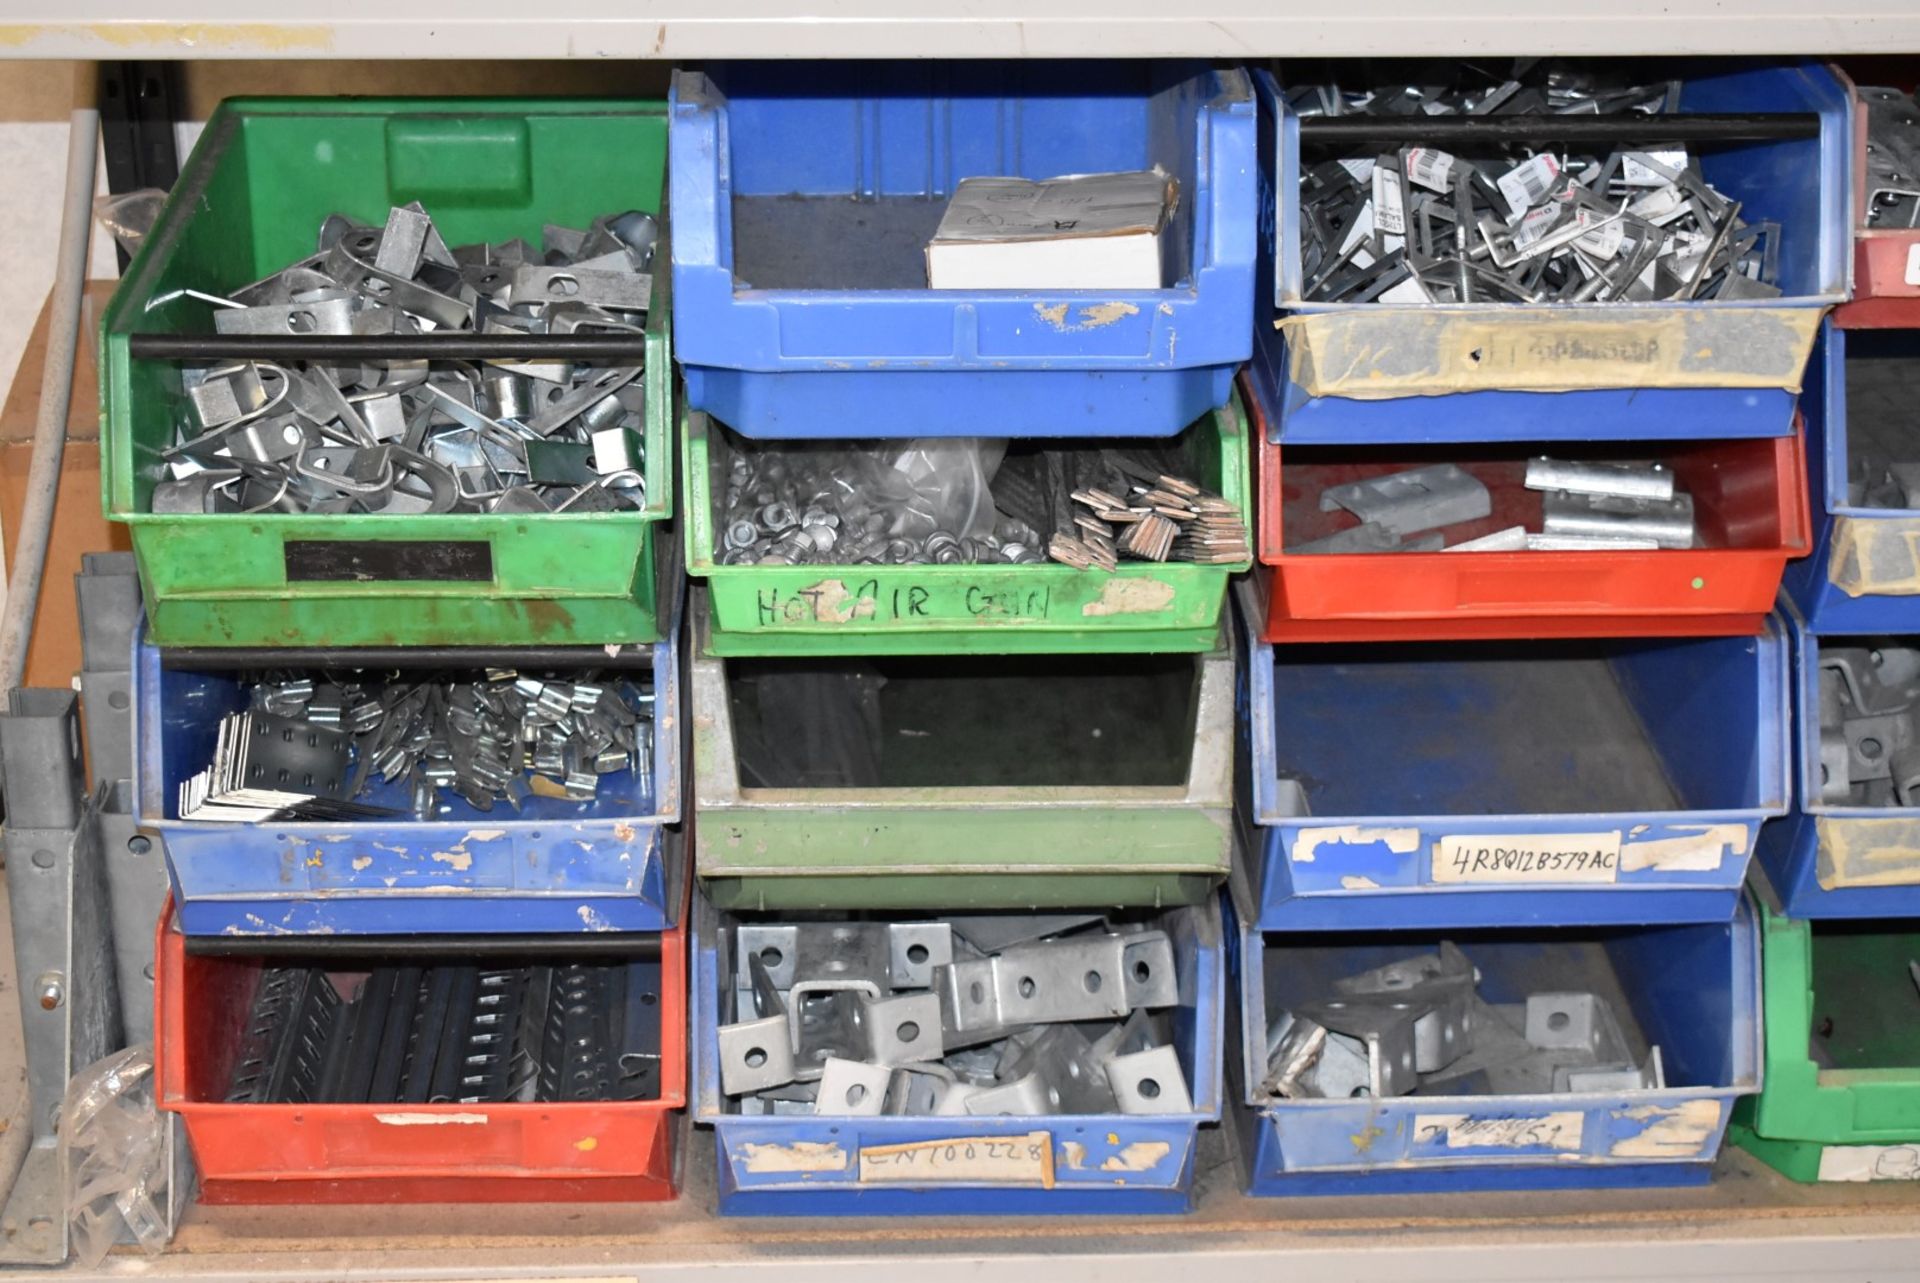 23 x Large Linbins With Contents - Includes Various Metal Conduit Fittings and Brackets - Image 2 of 25